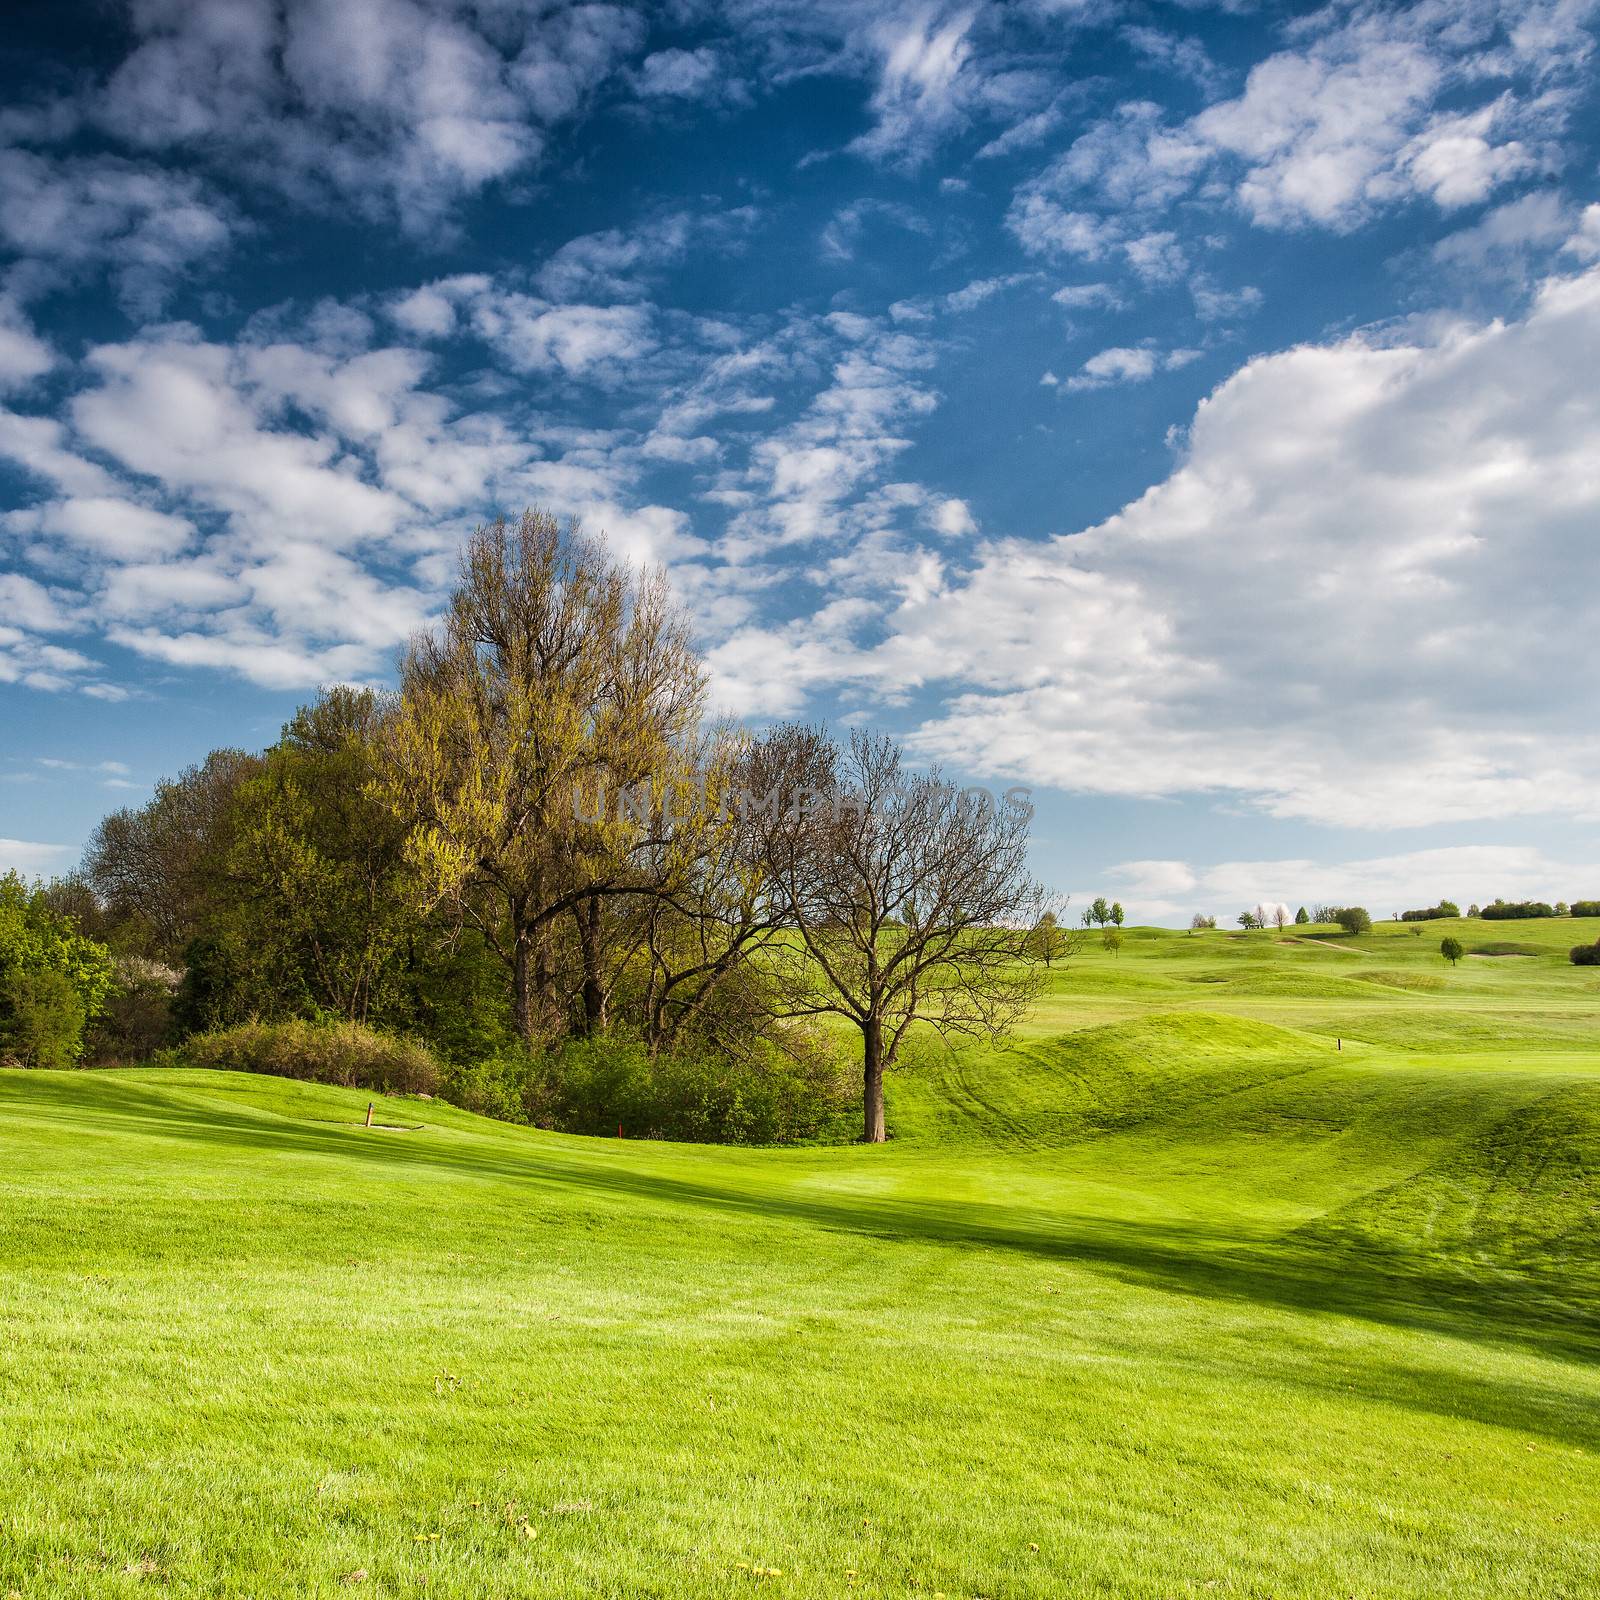 Golf course on the hills by CaptureLight